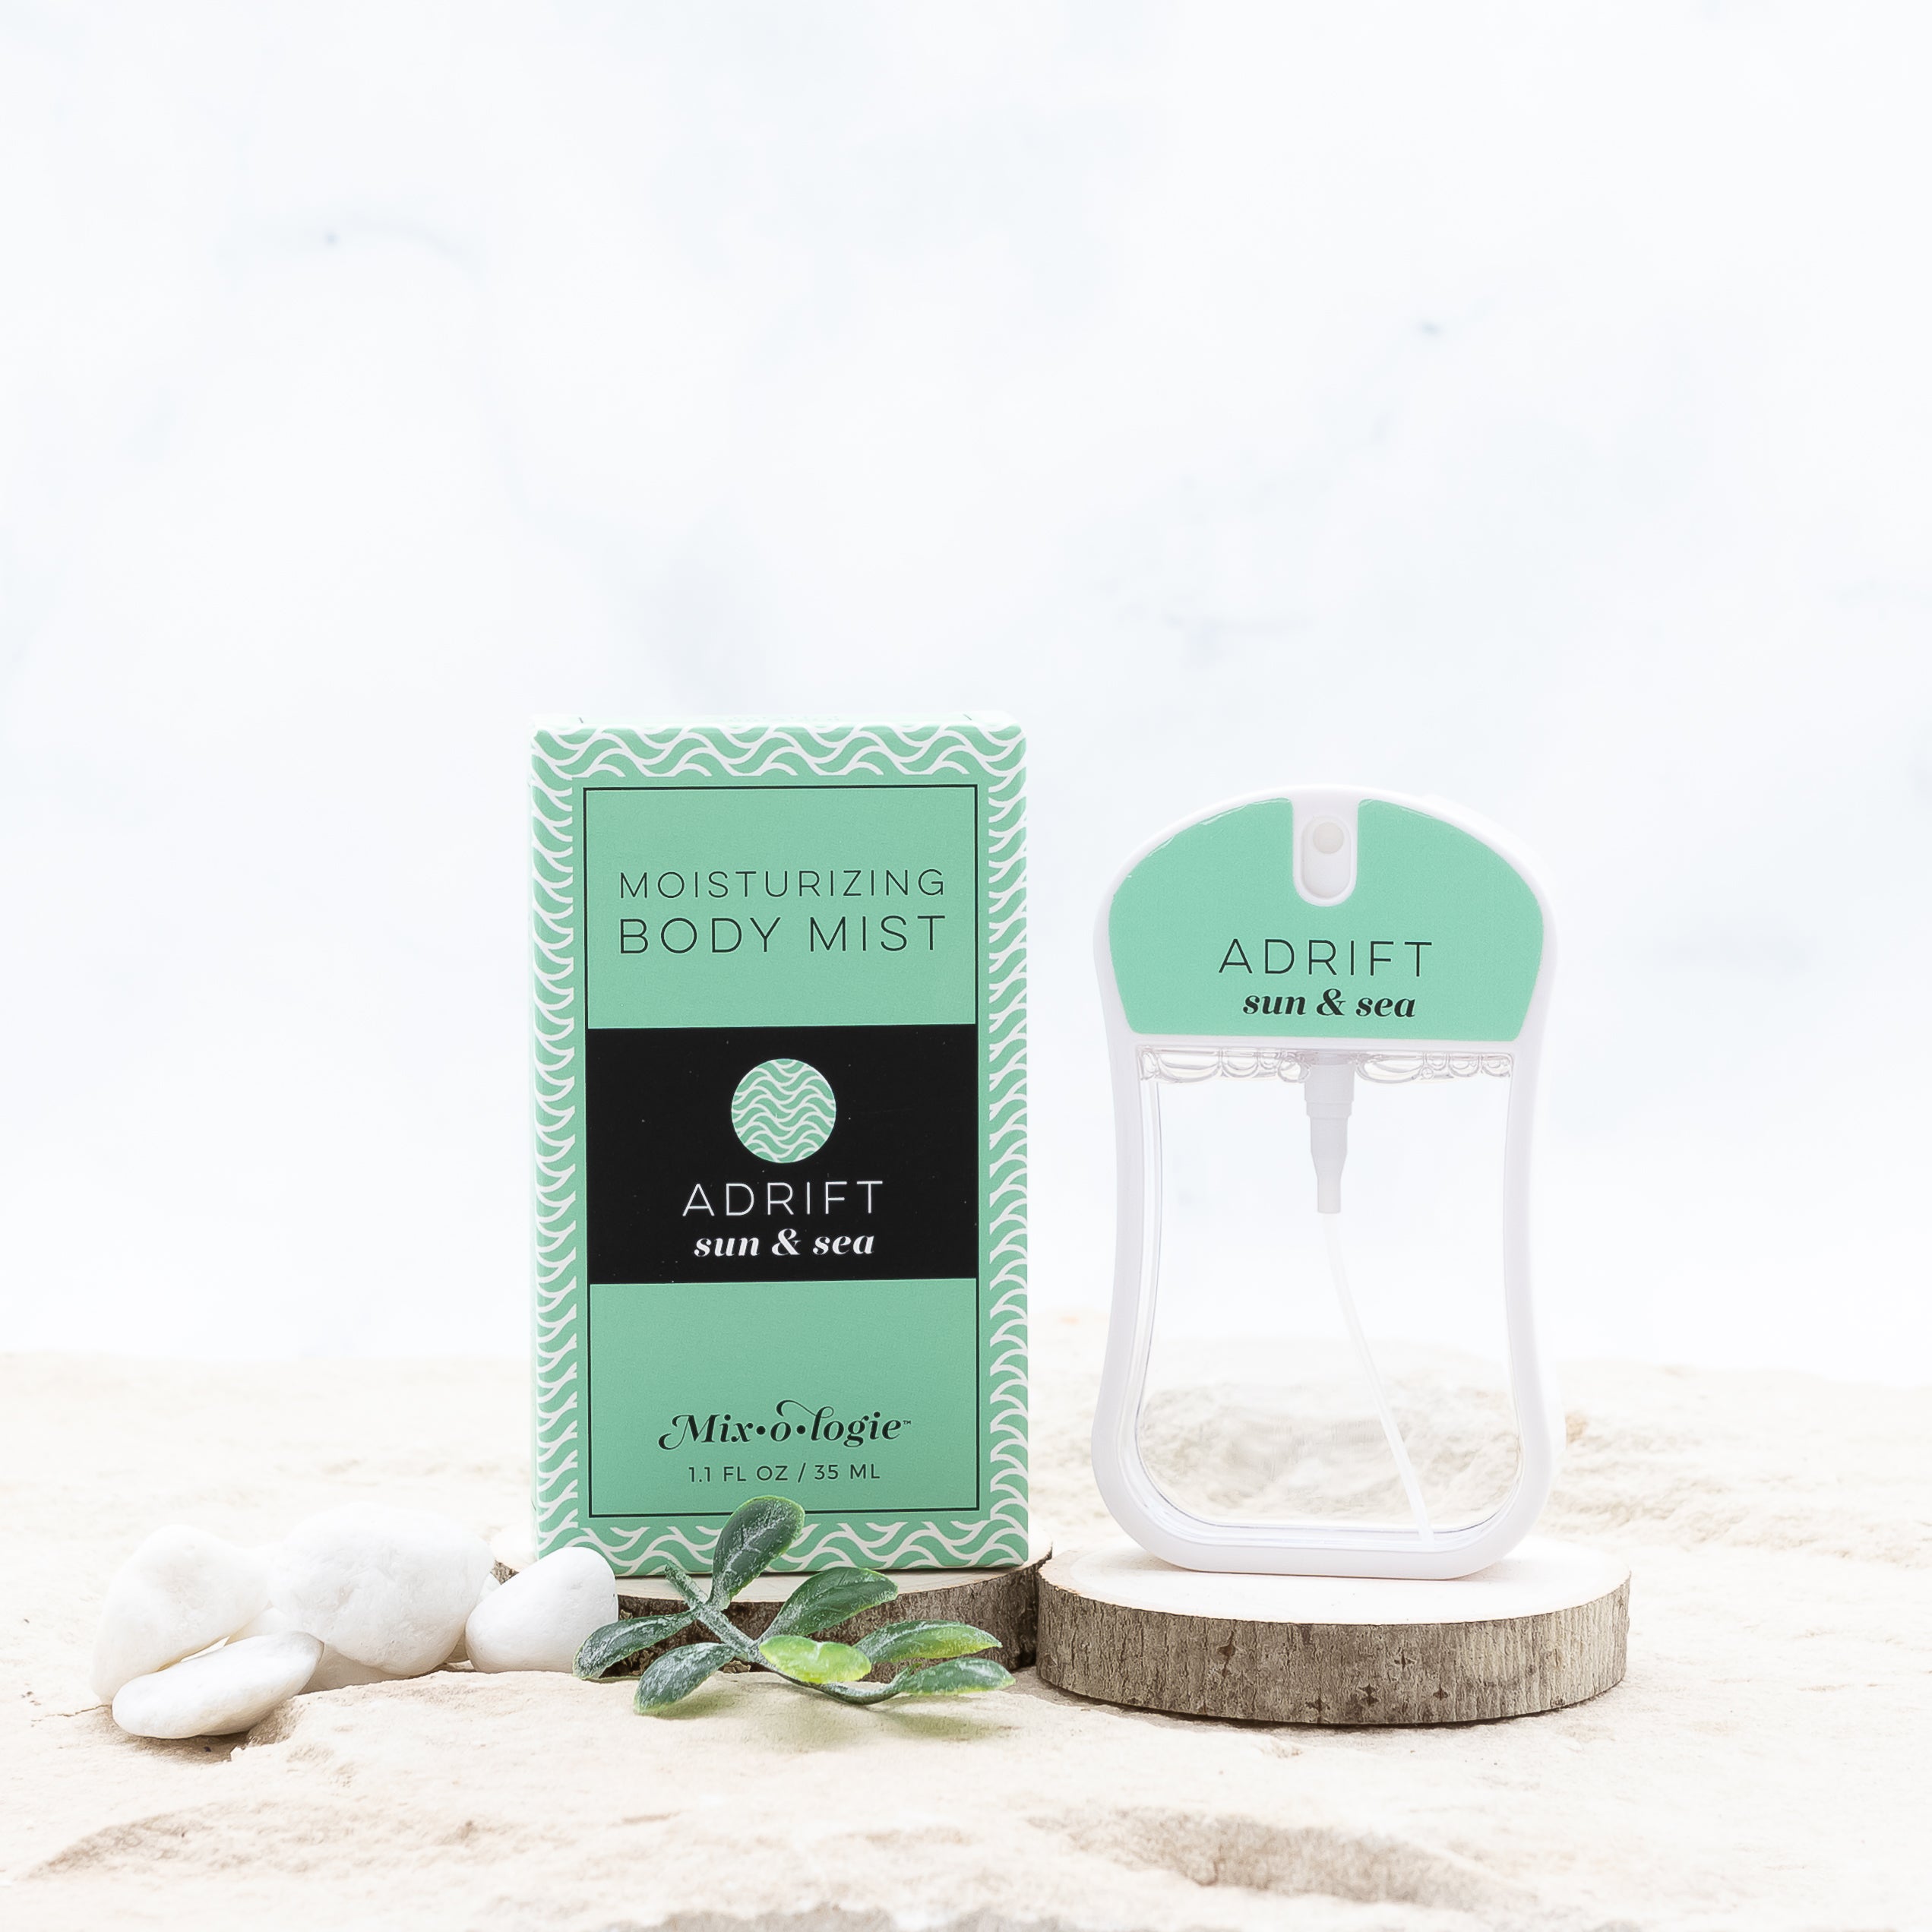 Adrift (Sun & Sea) moisturizing body mist in light green color box and spray bottle with light green color label and clear liquid. Spray bottle has 1.1 fl oz or 35 mL. Box and spray bottle are on wood in sand with greenery and pebbles.